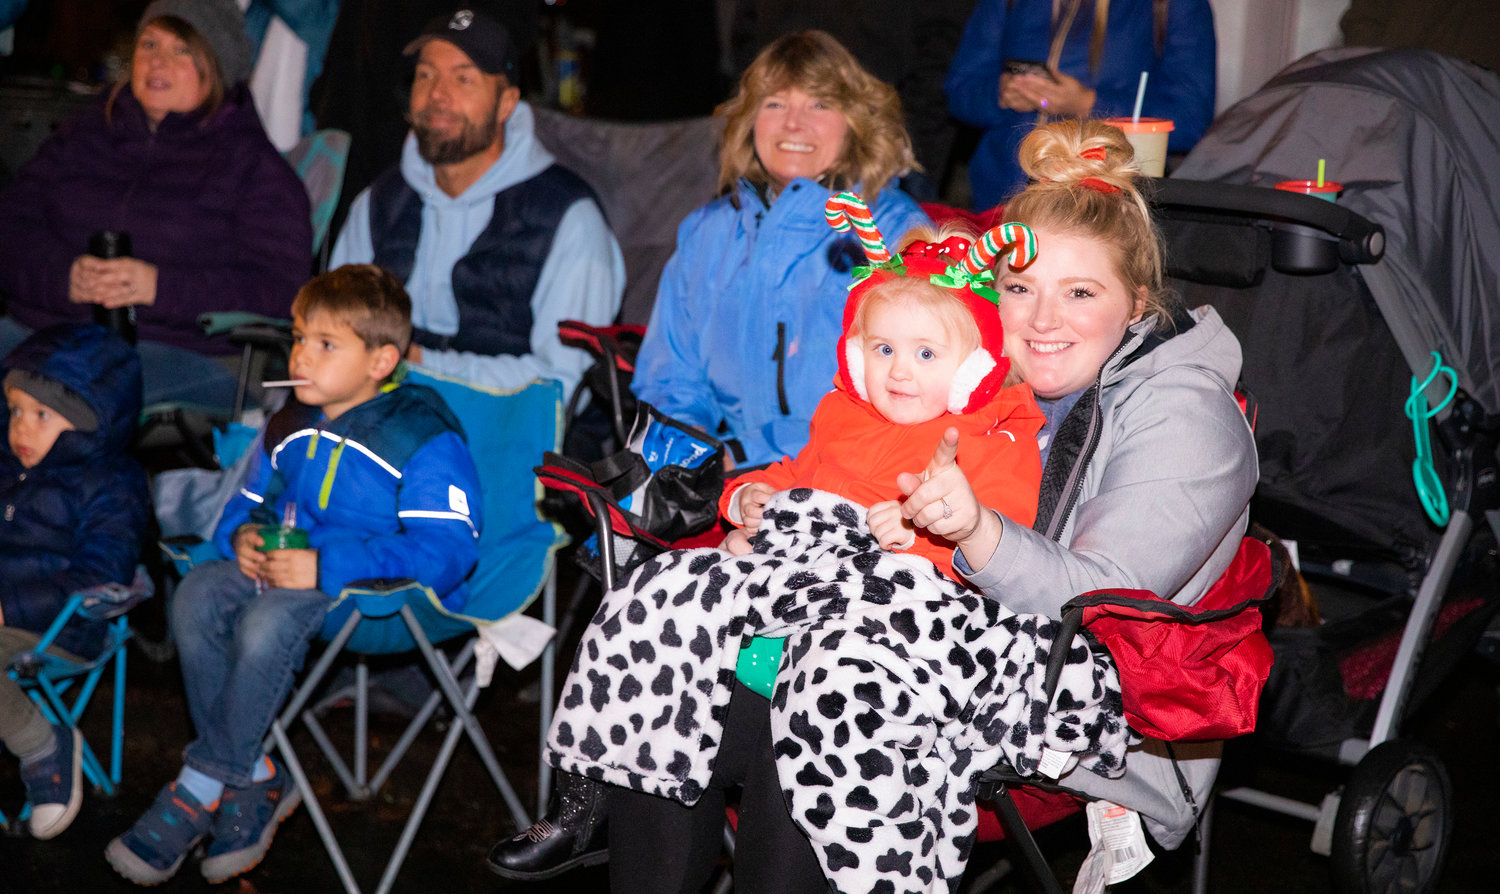 Kennedy, 3, and Brandi Brantley smile and watch the Lighted Tractor Parade Saturday night in downtown Centralia.